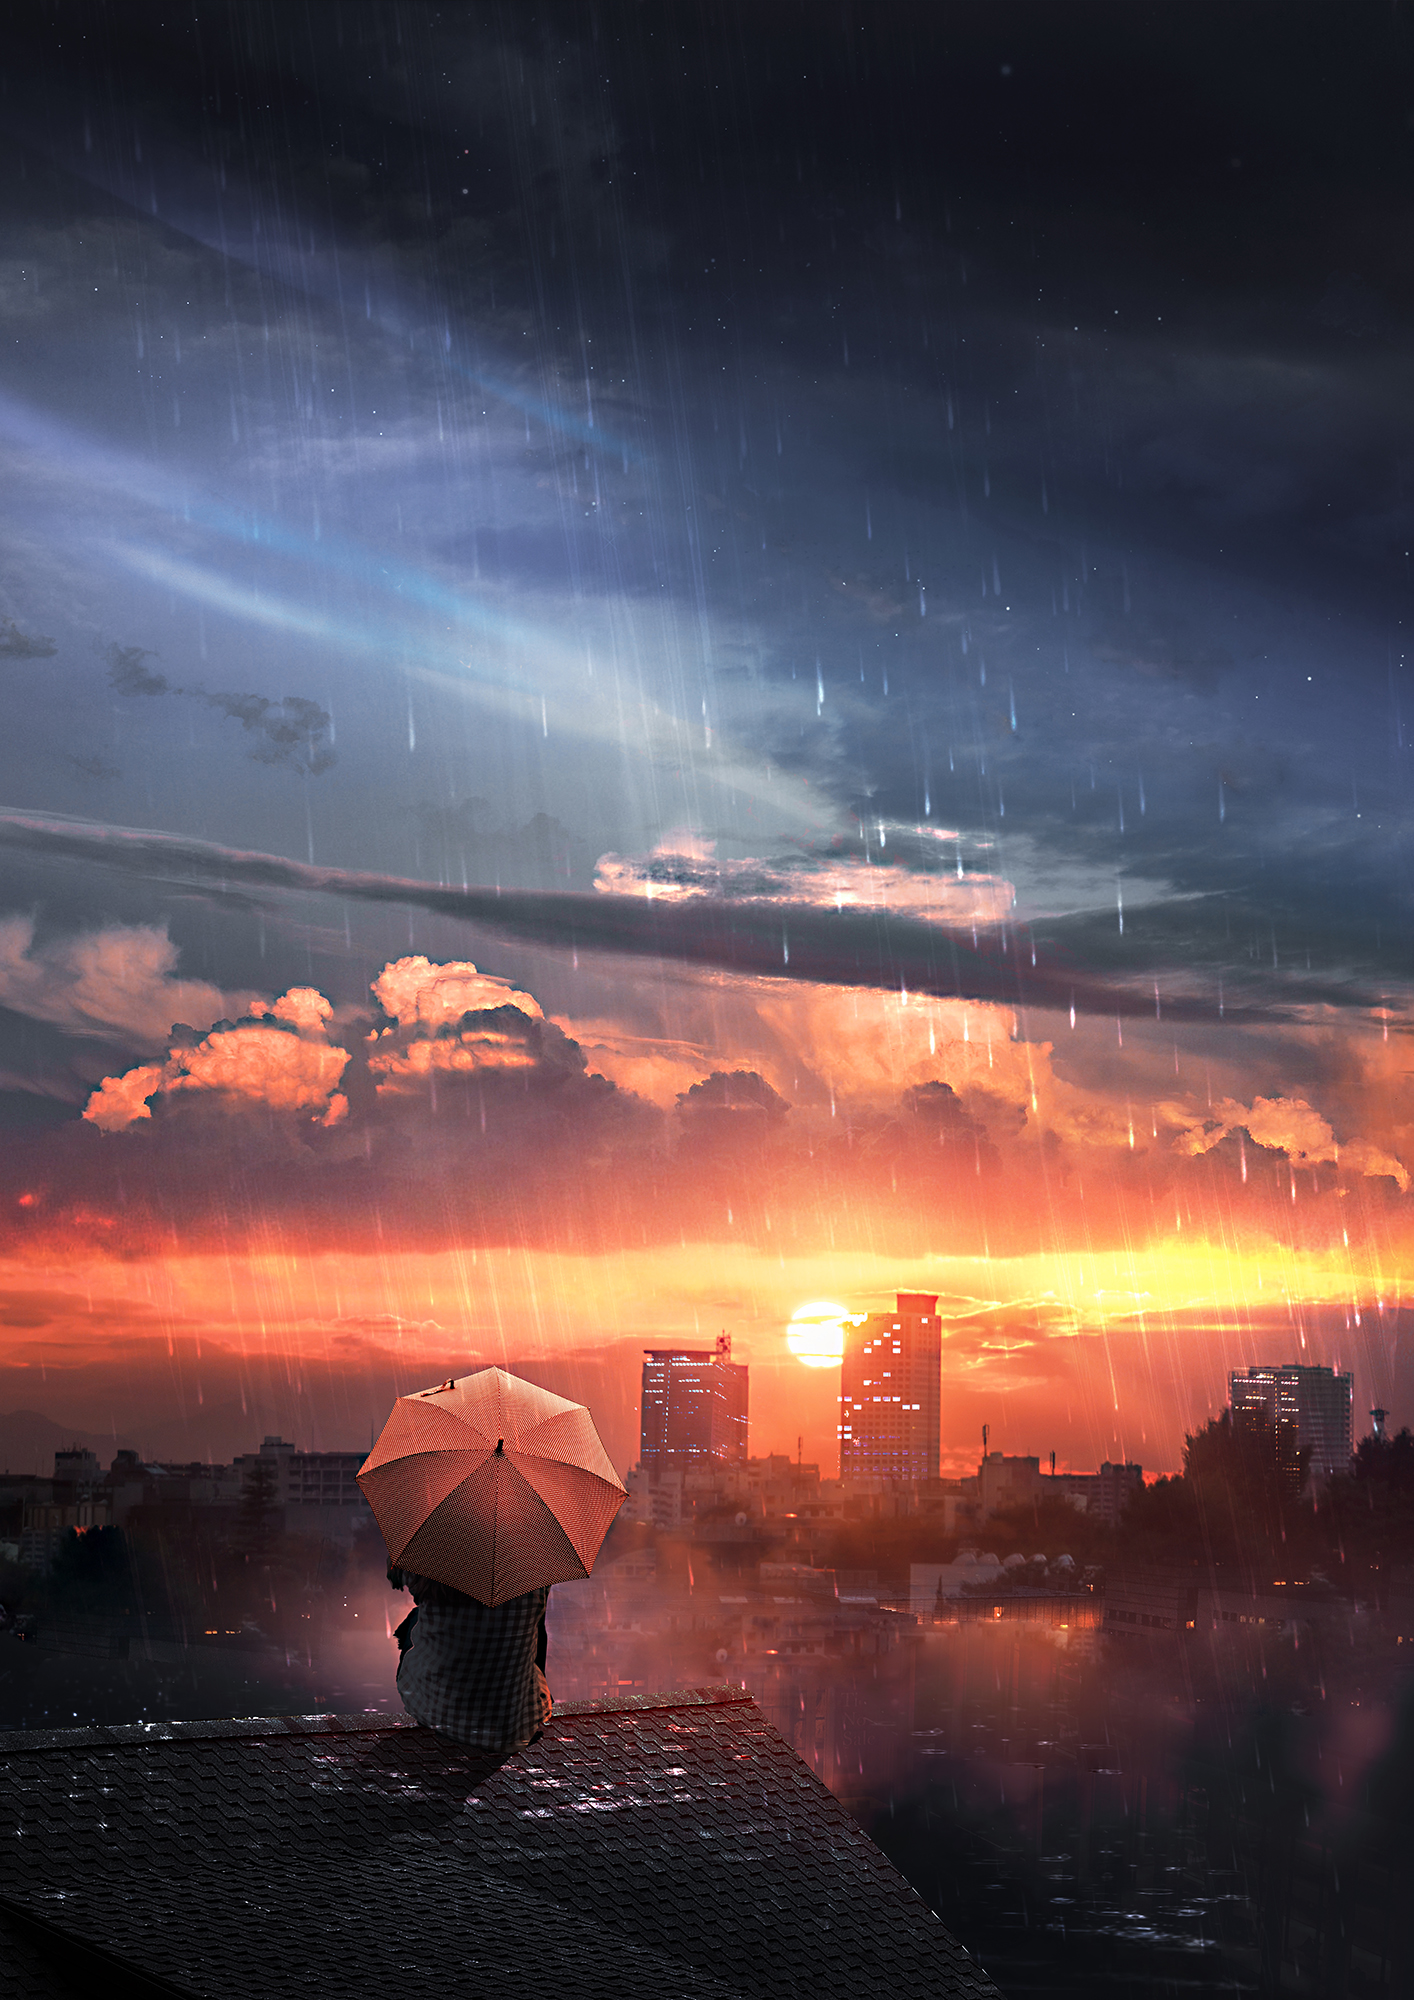 rain, privacy, loneliness, art, night, roof, seclusion, sky, umbrella wallpaper for mobile